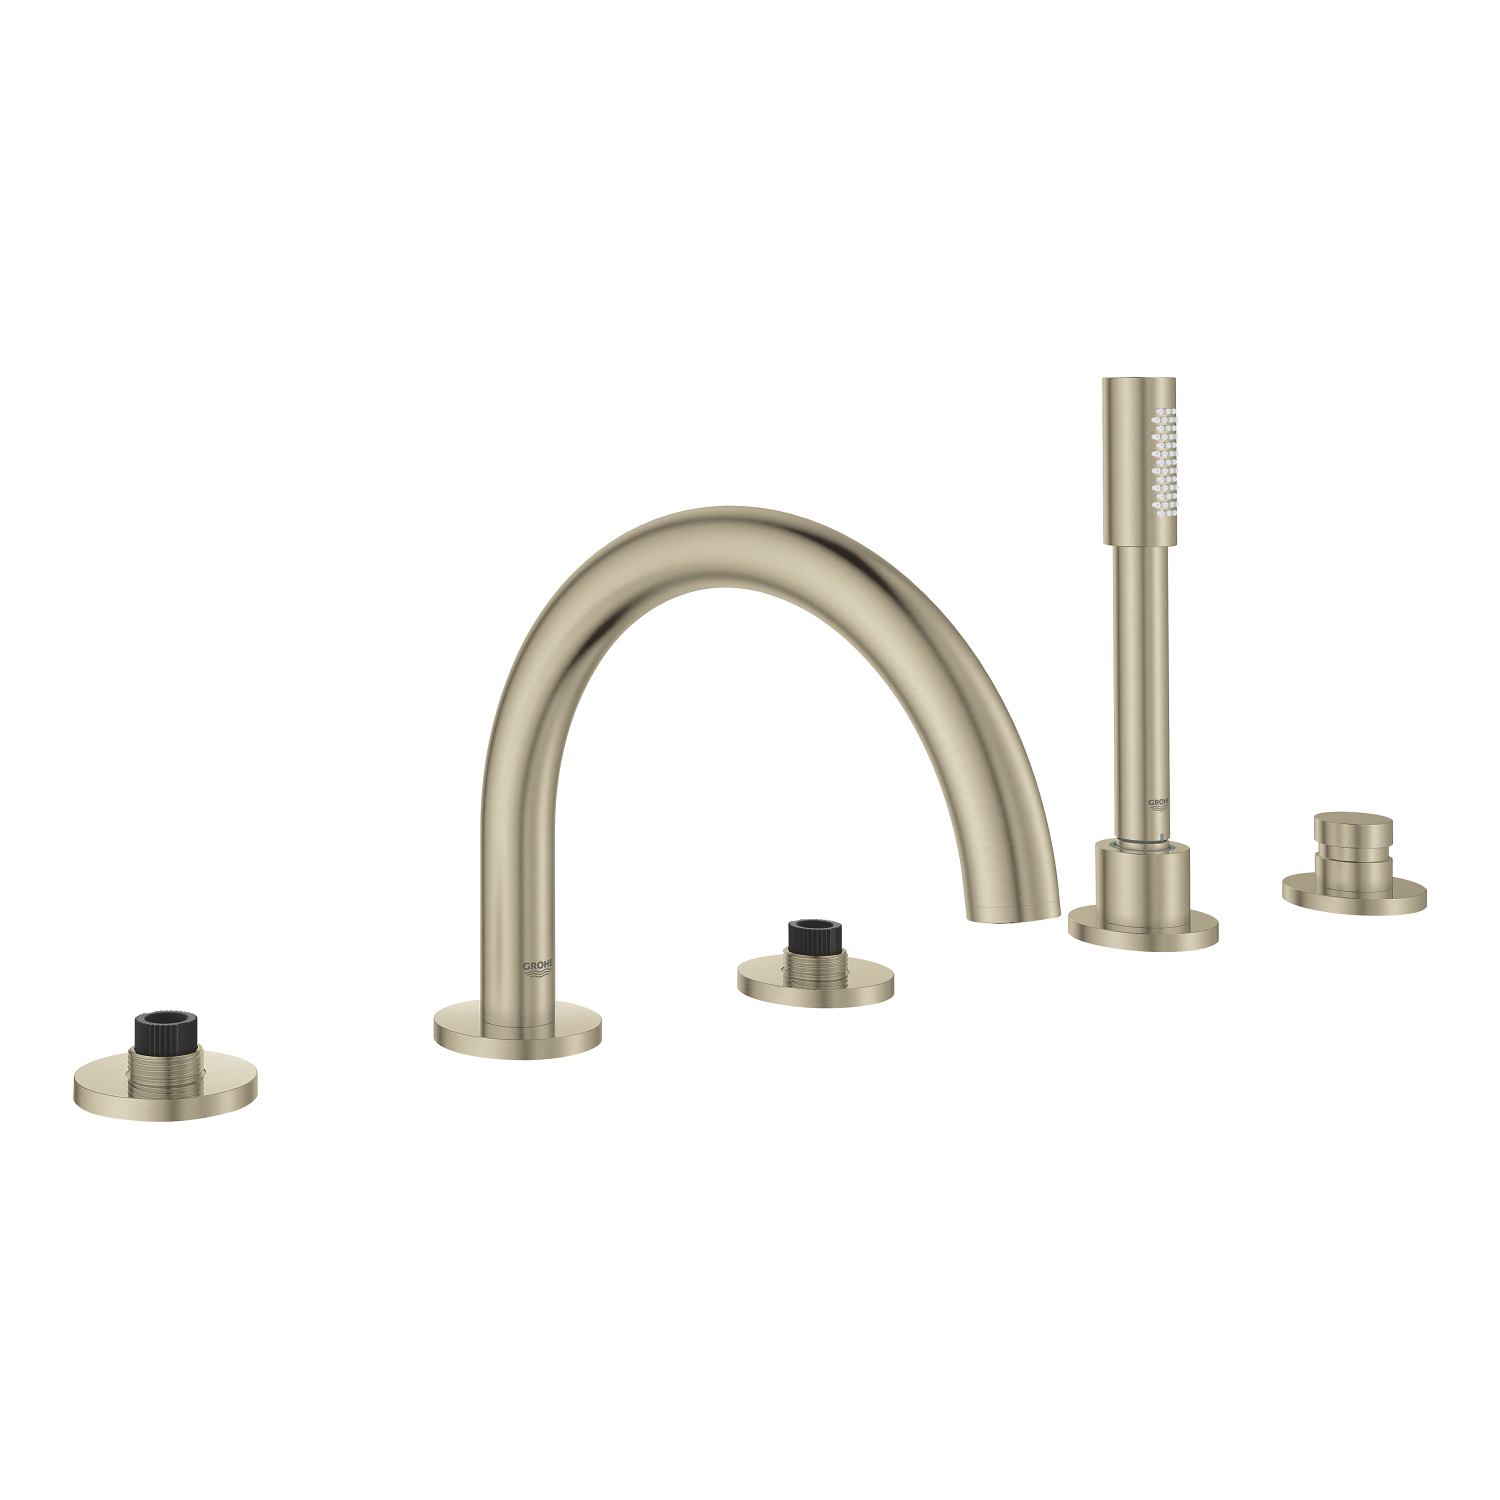 Atrio Deck Mounted Tub Faucet Plus Hand Shower In Brushed Nickel  